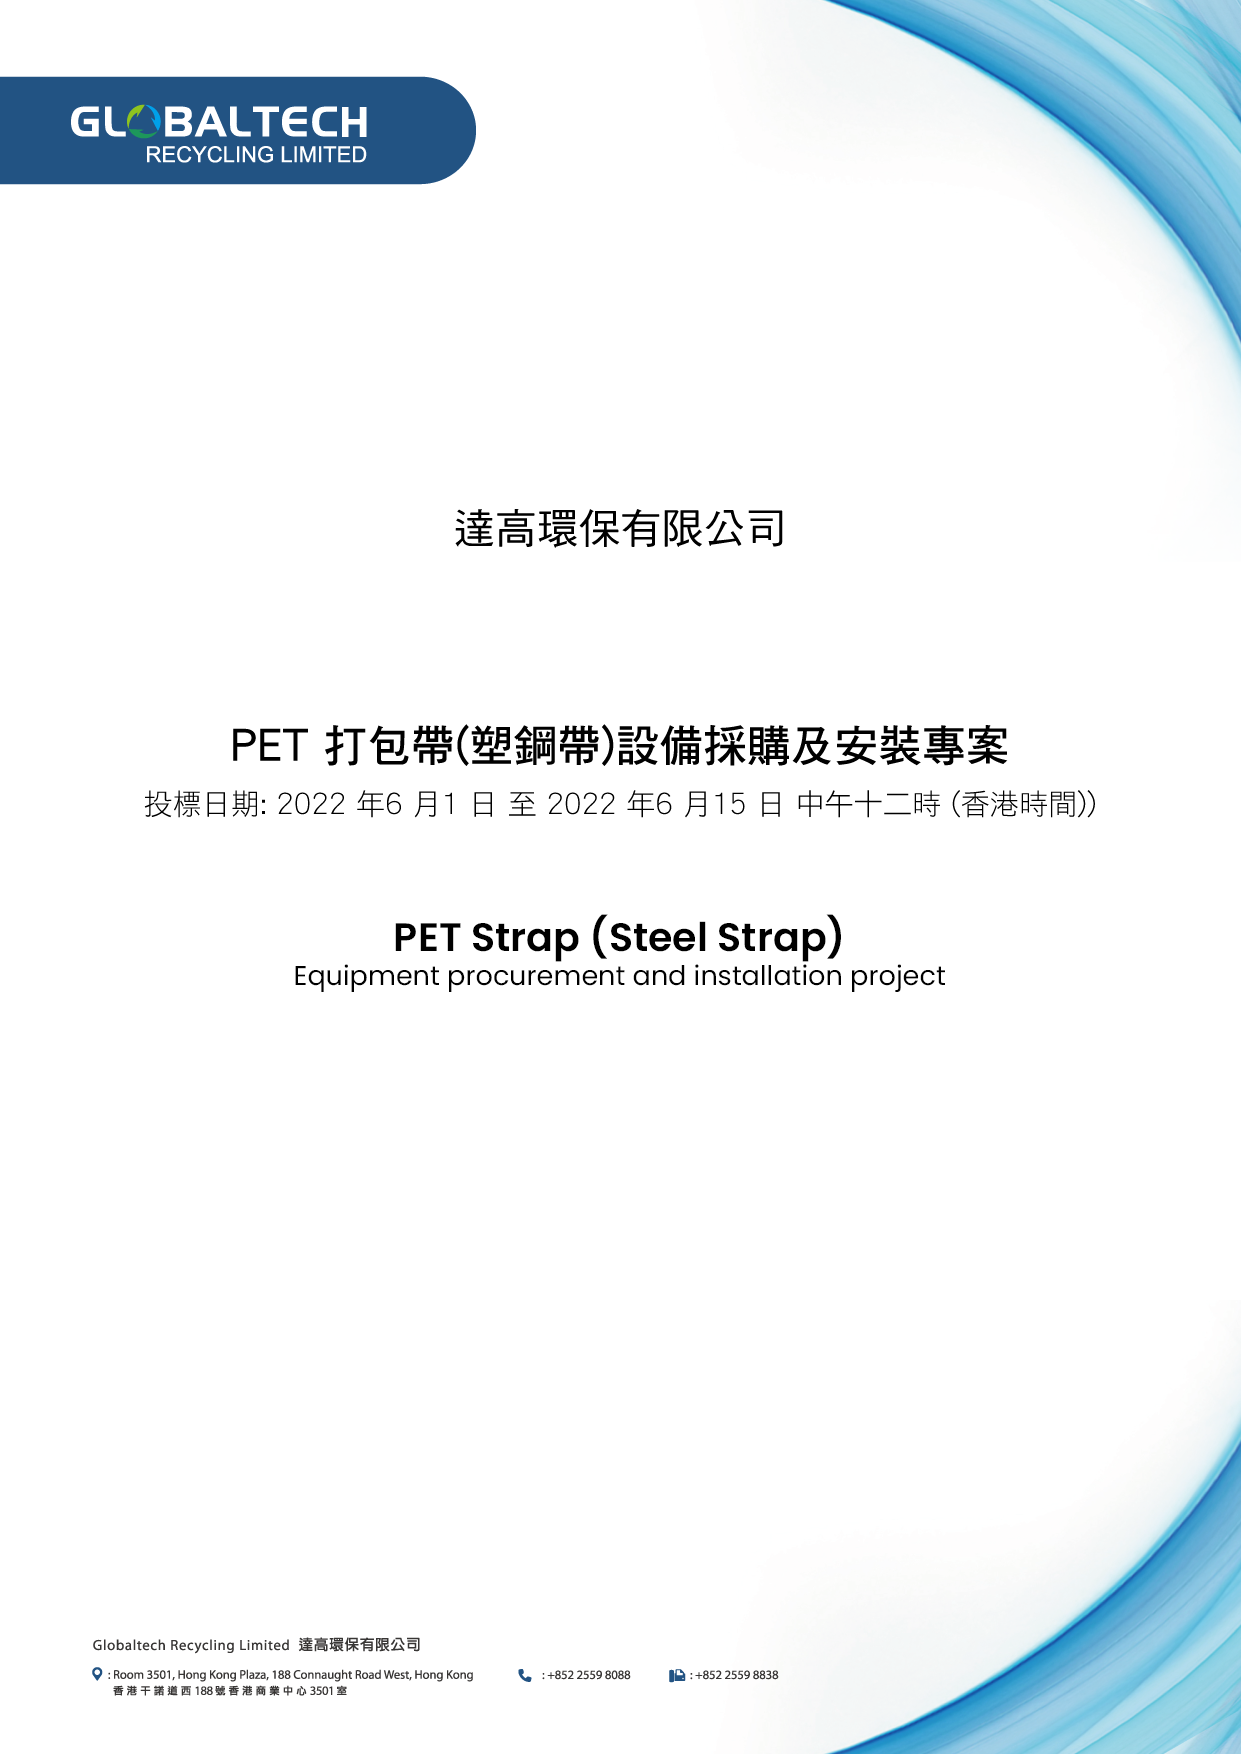 PDF for Tender of PET Strap Procurement and Installation